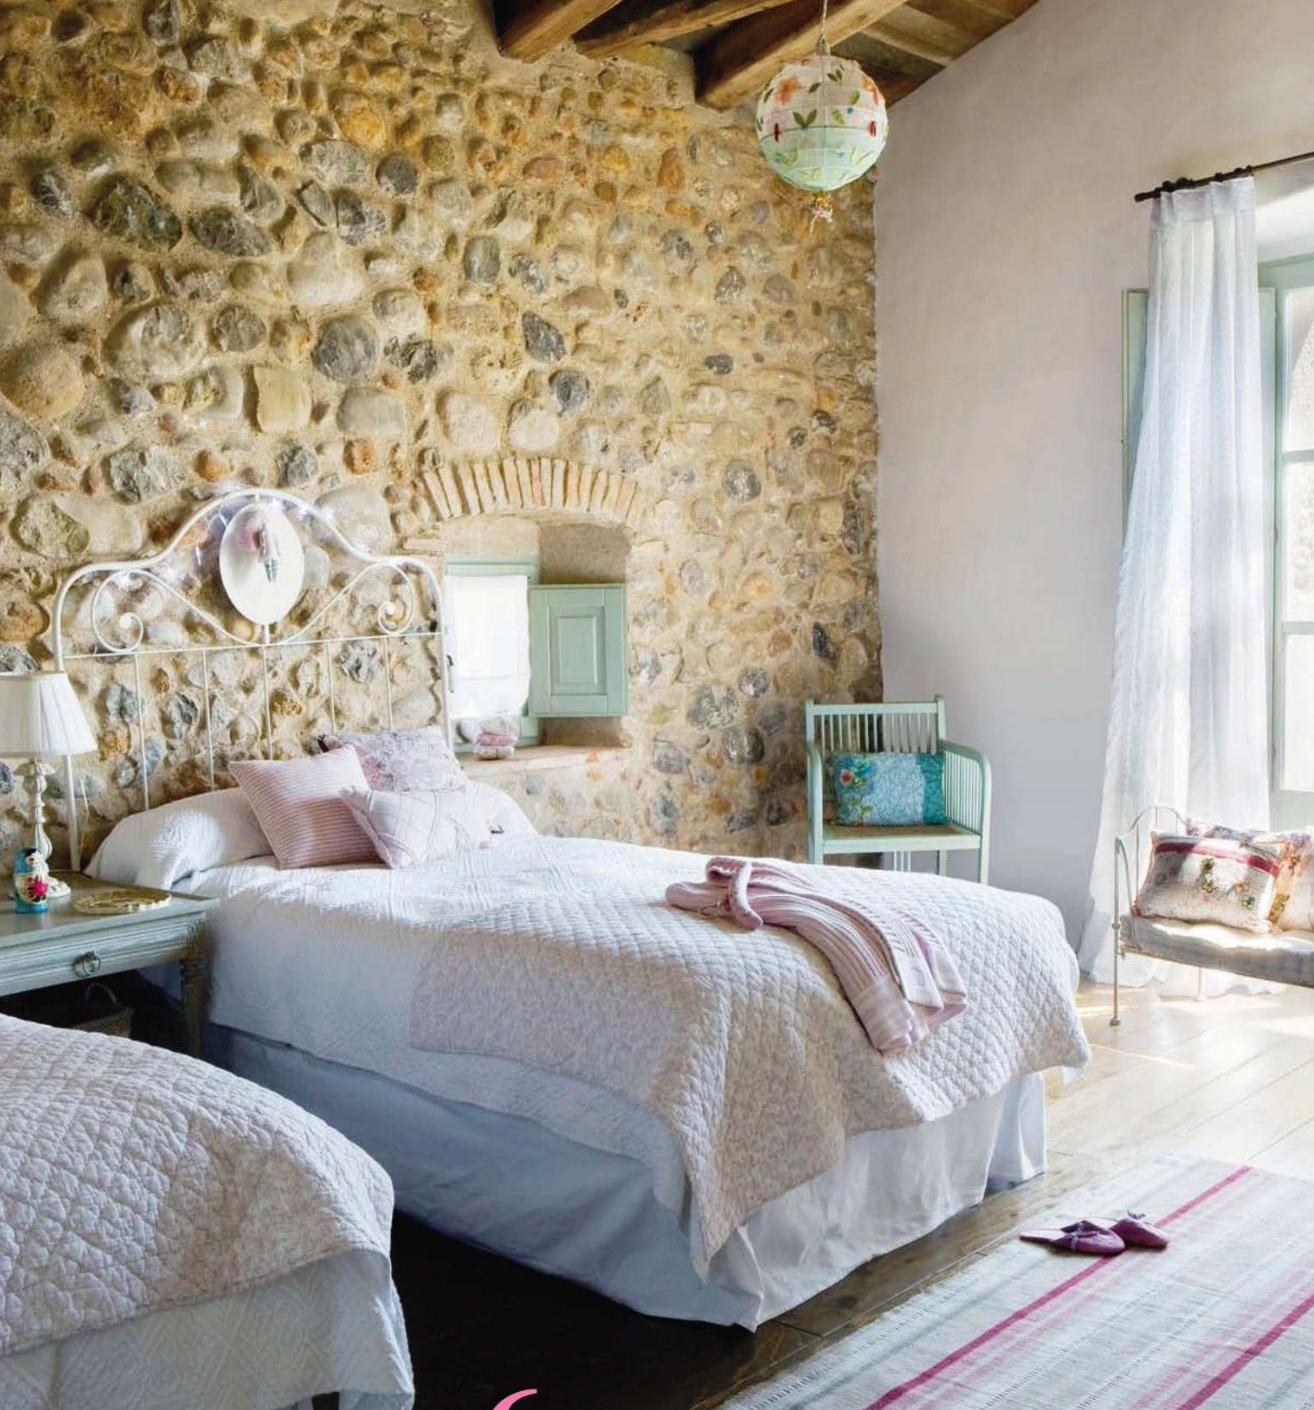 Exposed stone wall in offbeat places, like in this children’s room is a very creative and bold design decision